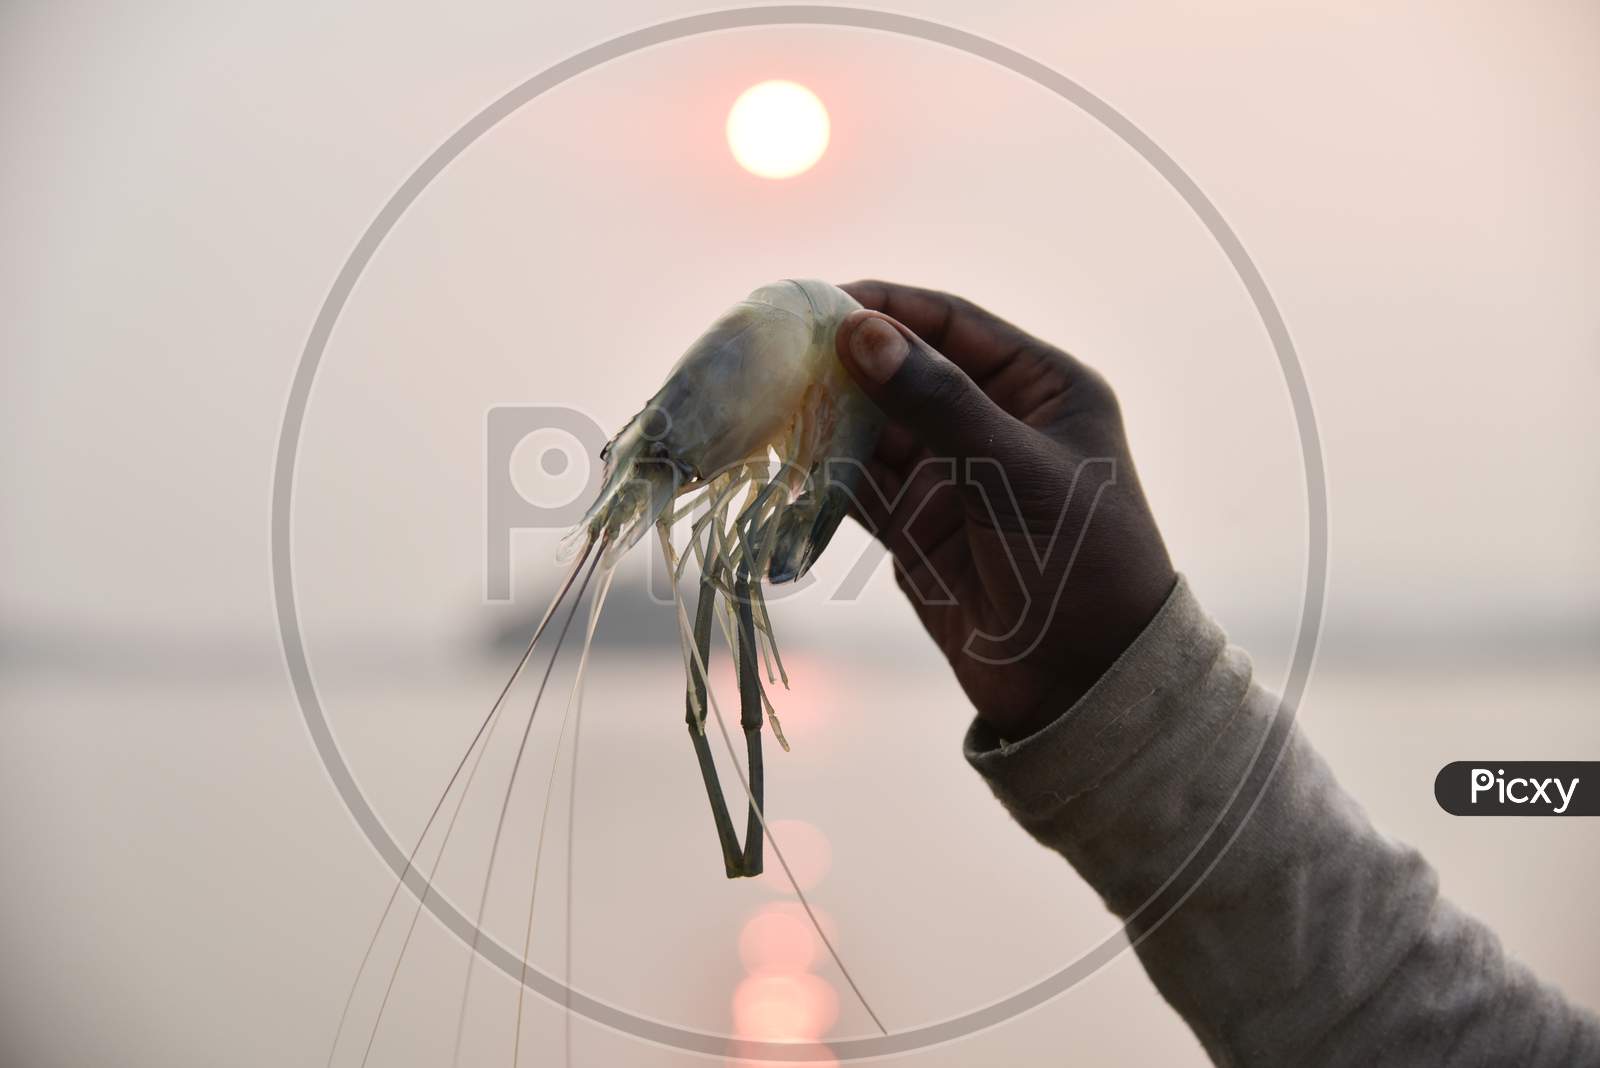 An Indian Fisherman Show His Catch In The Brahmaputra River At Sunset In Guwahati